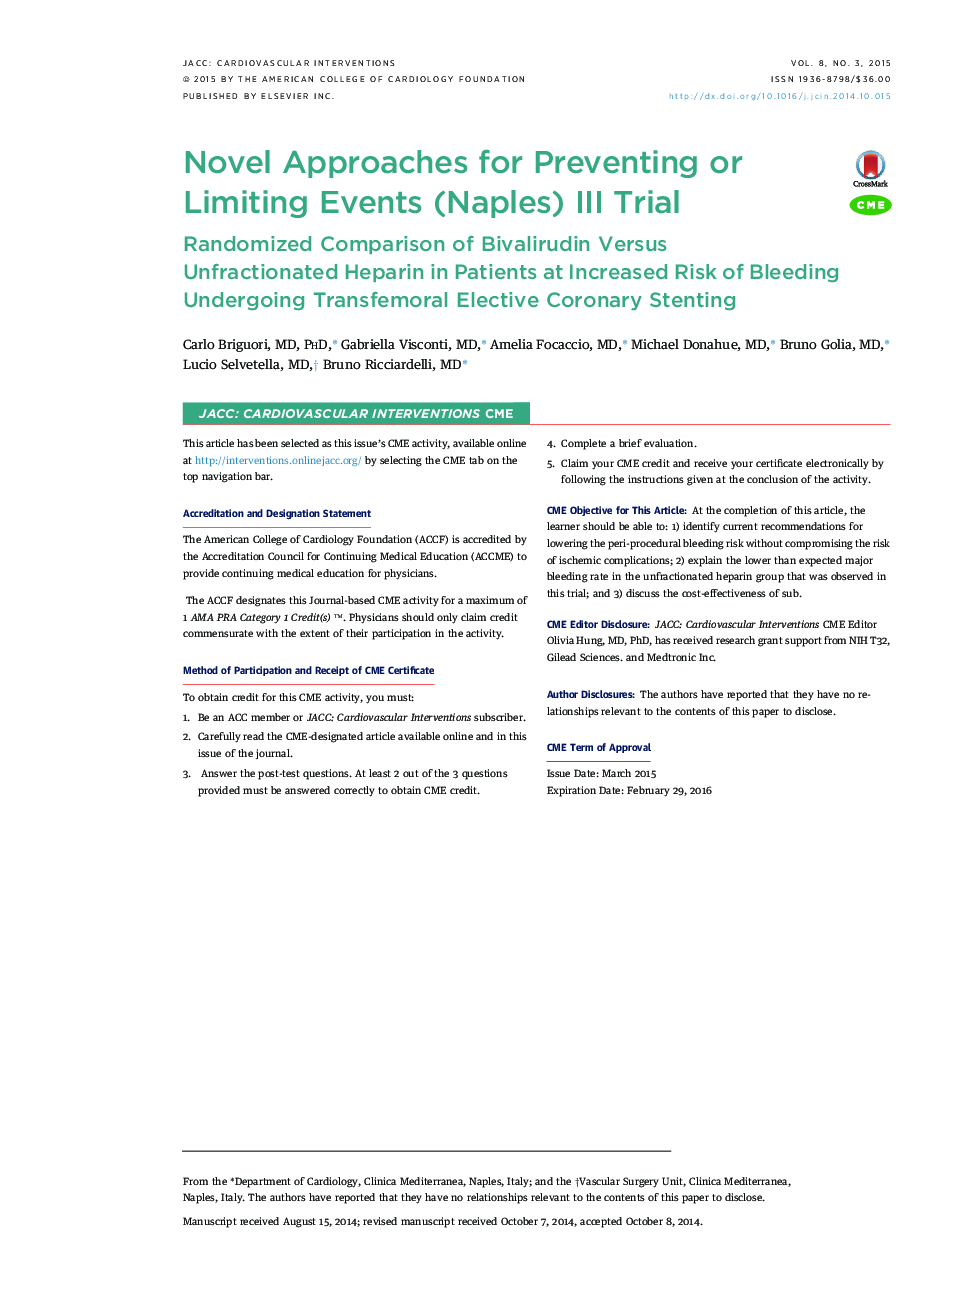 Novel Approaches for Preventing or LimitingÂ Events (Naples) III Trial: Randomized Comparison of Bivalirudin Versus Unfractionated Heparin in Patients at Increased Risk of Bleeding Undergoing Transfemoral Elective Coronary Stenting